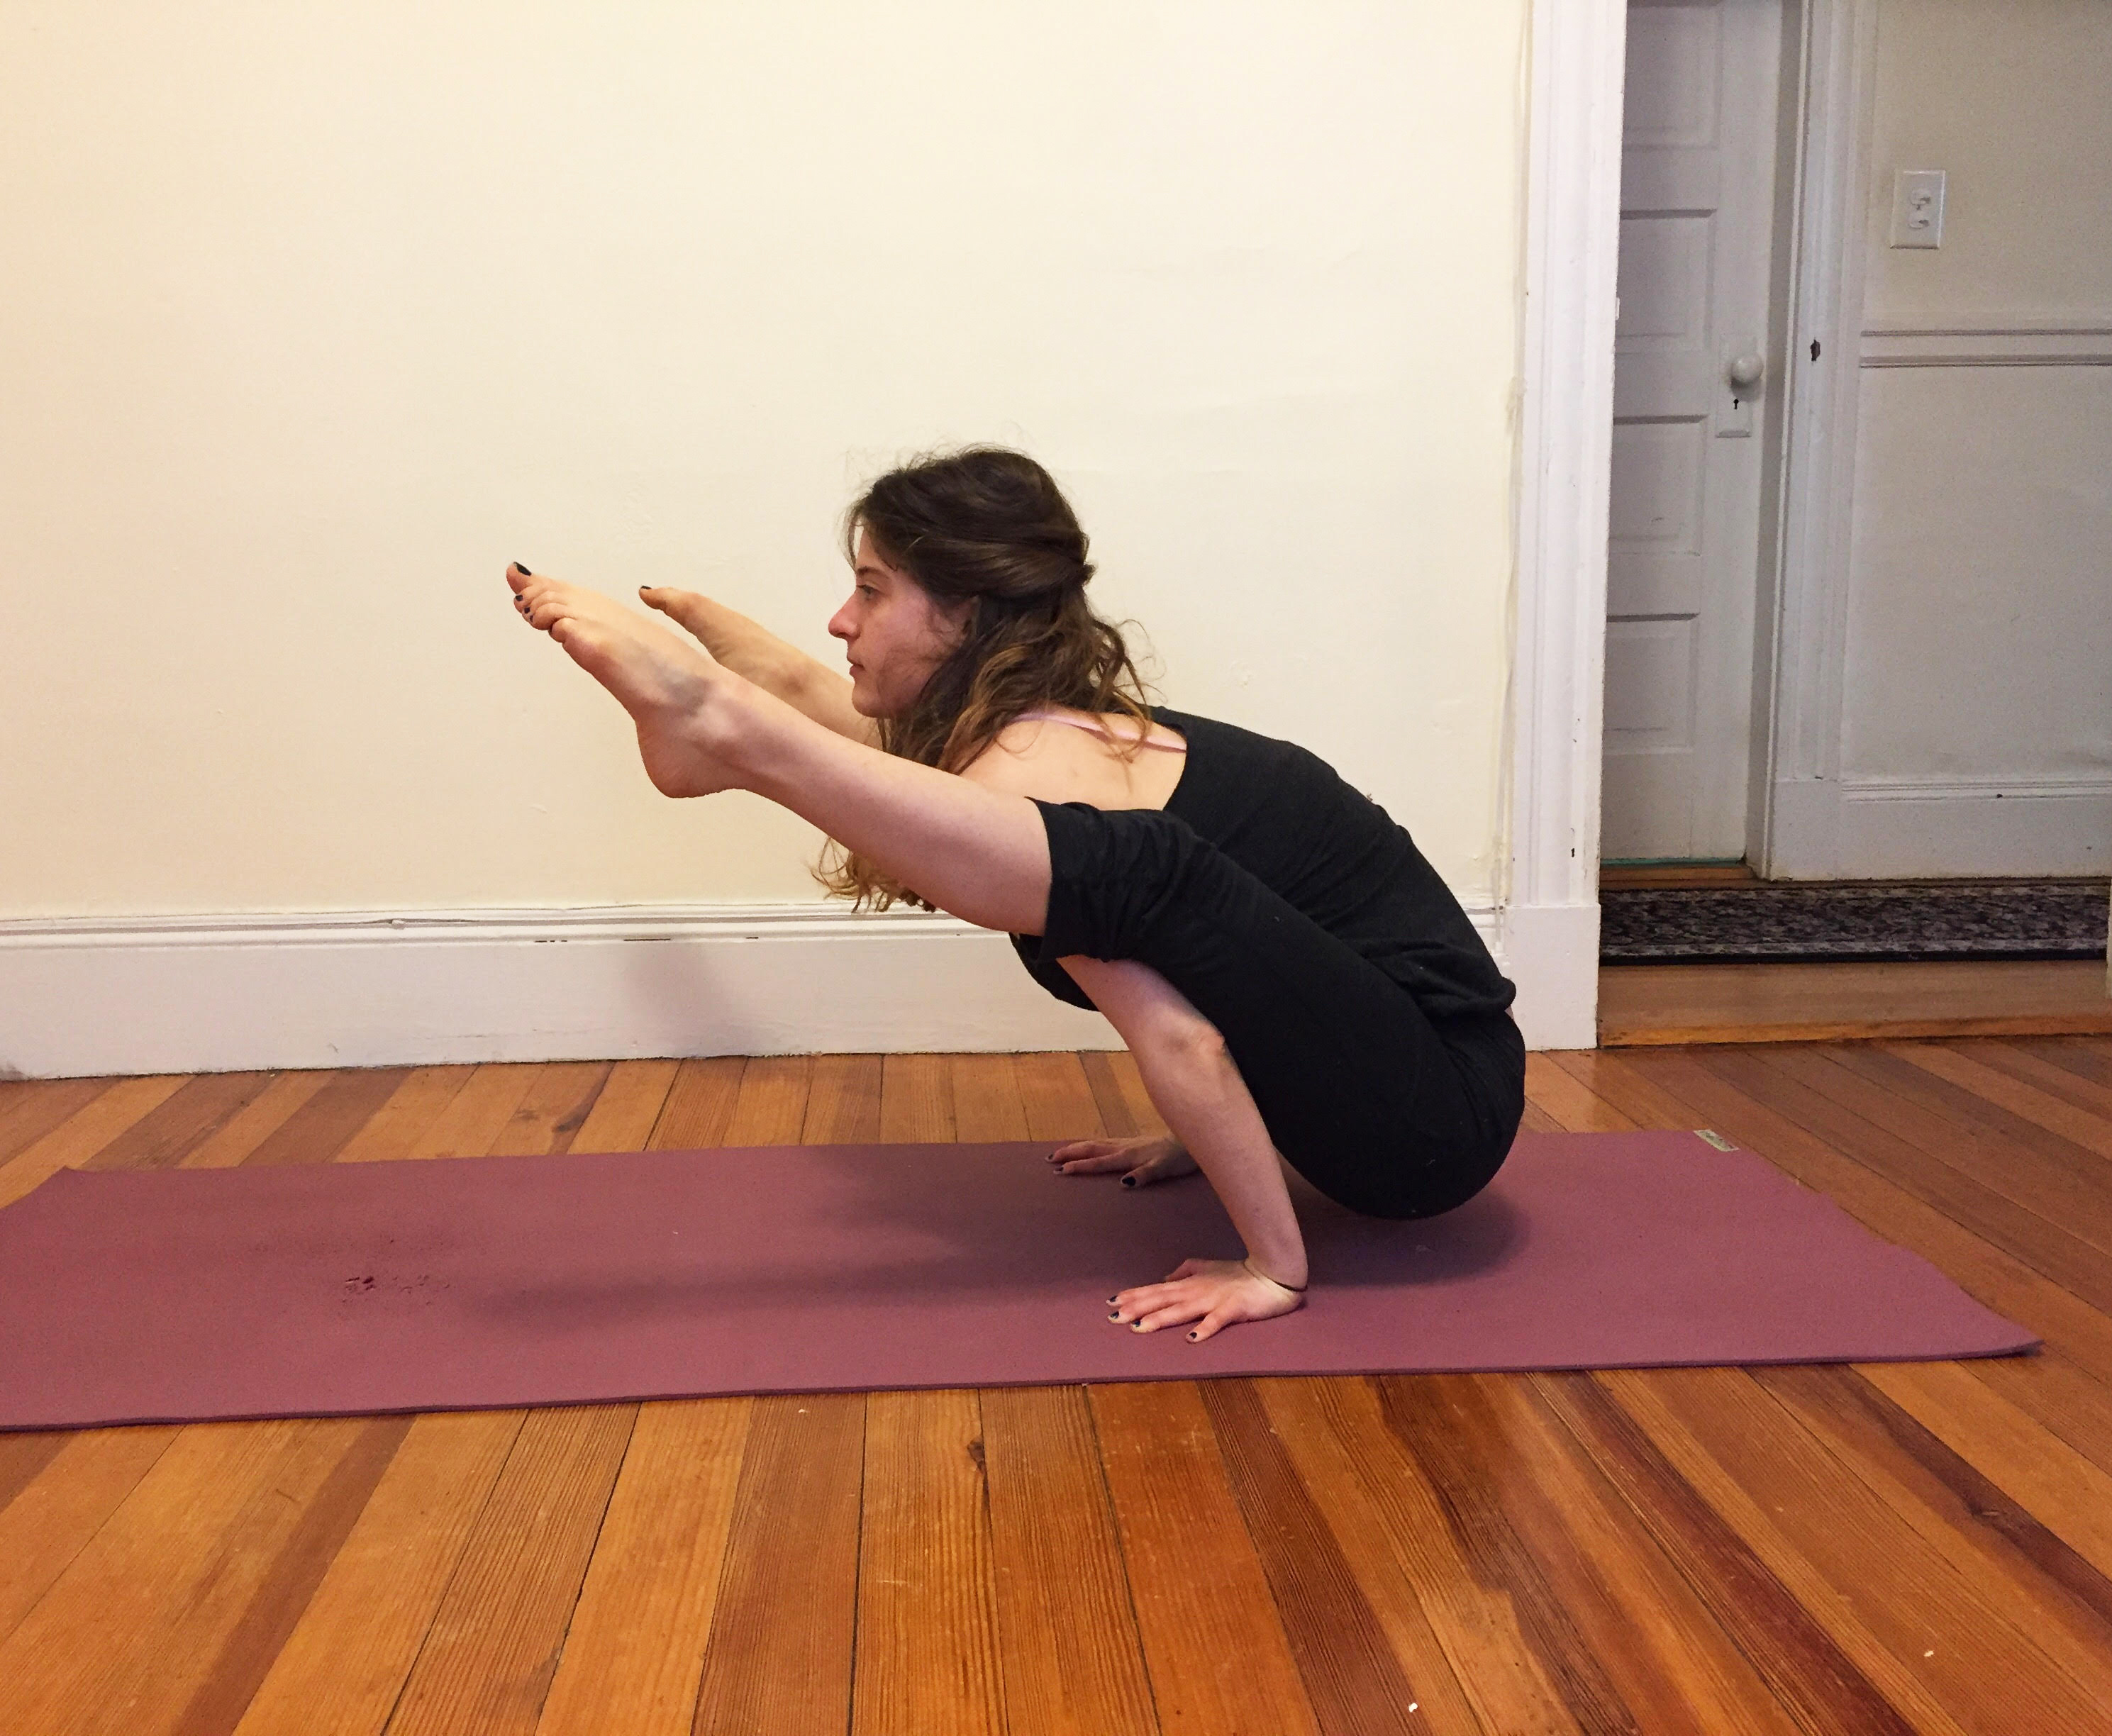 These 4 Yoga Poses Will Strengthen Your Entire Body